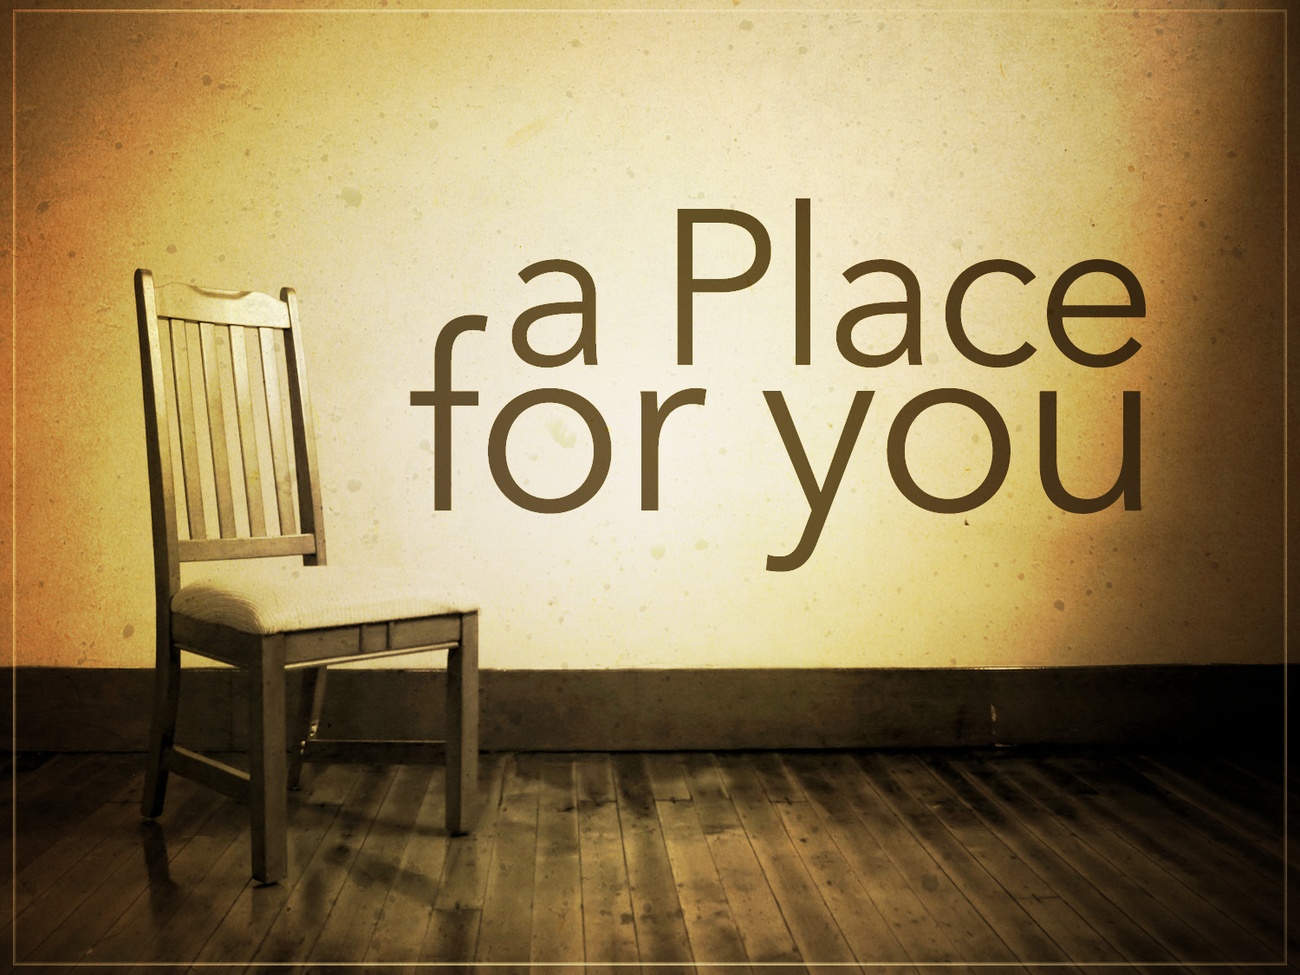 There Is a Place For You